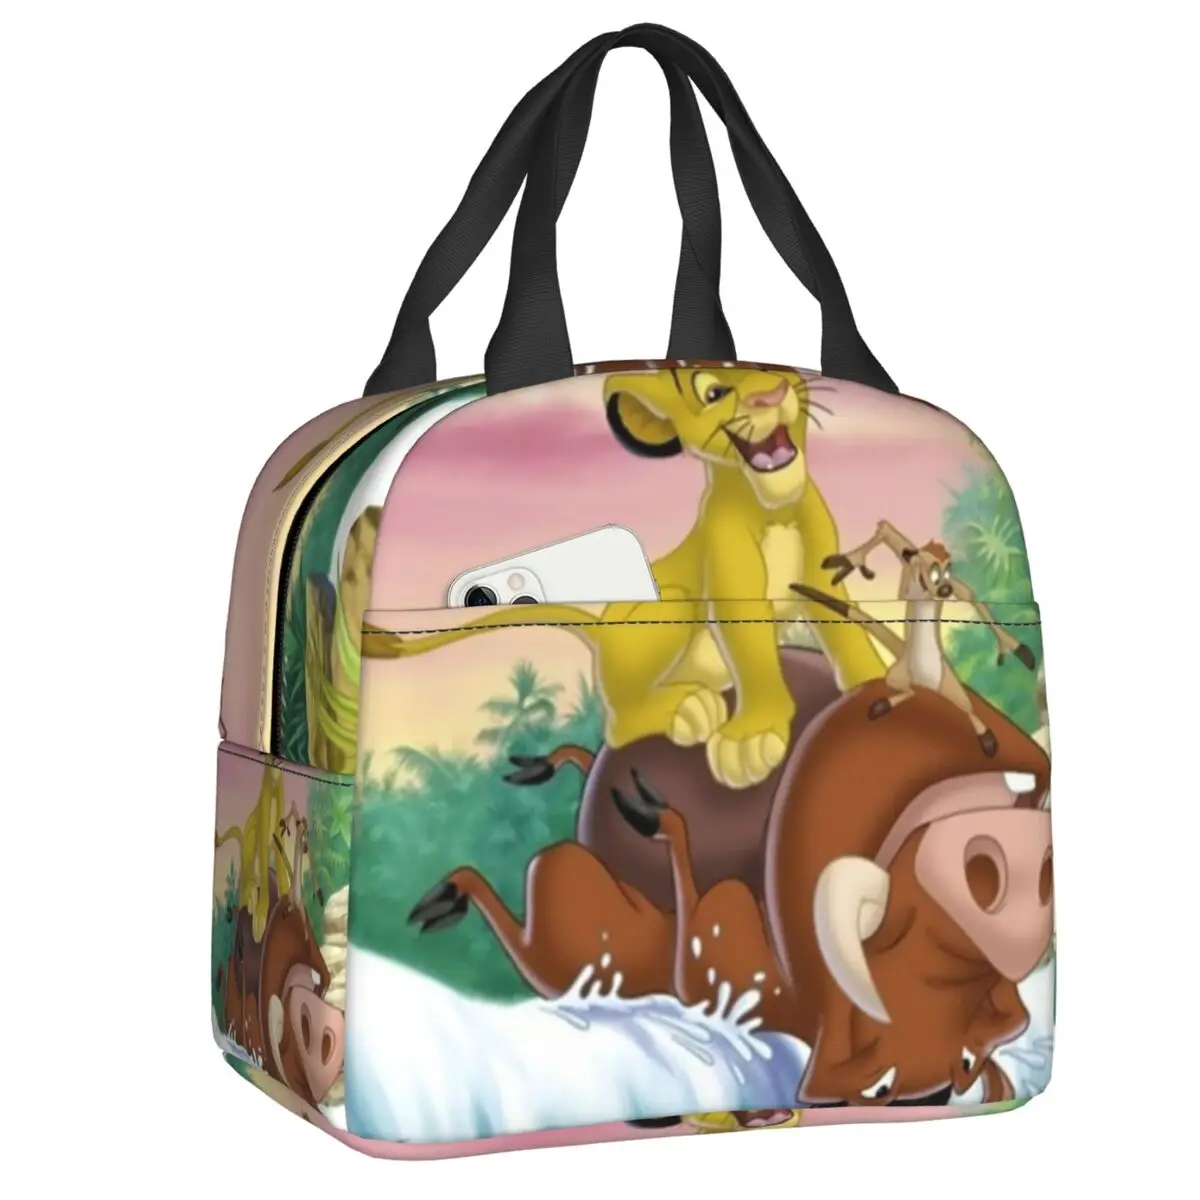 

Italian Animated Television Lion King Simba Insulated Lunch Bag for Work School Waterproof Thermal Cooler Bento Box Women